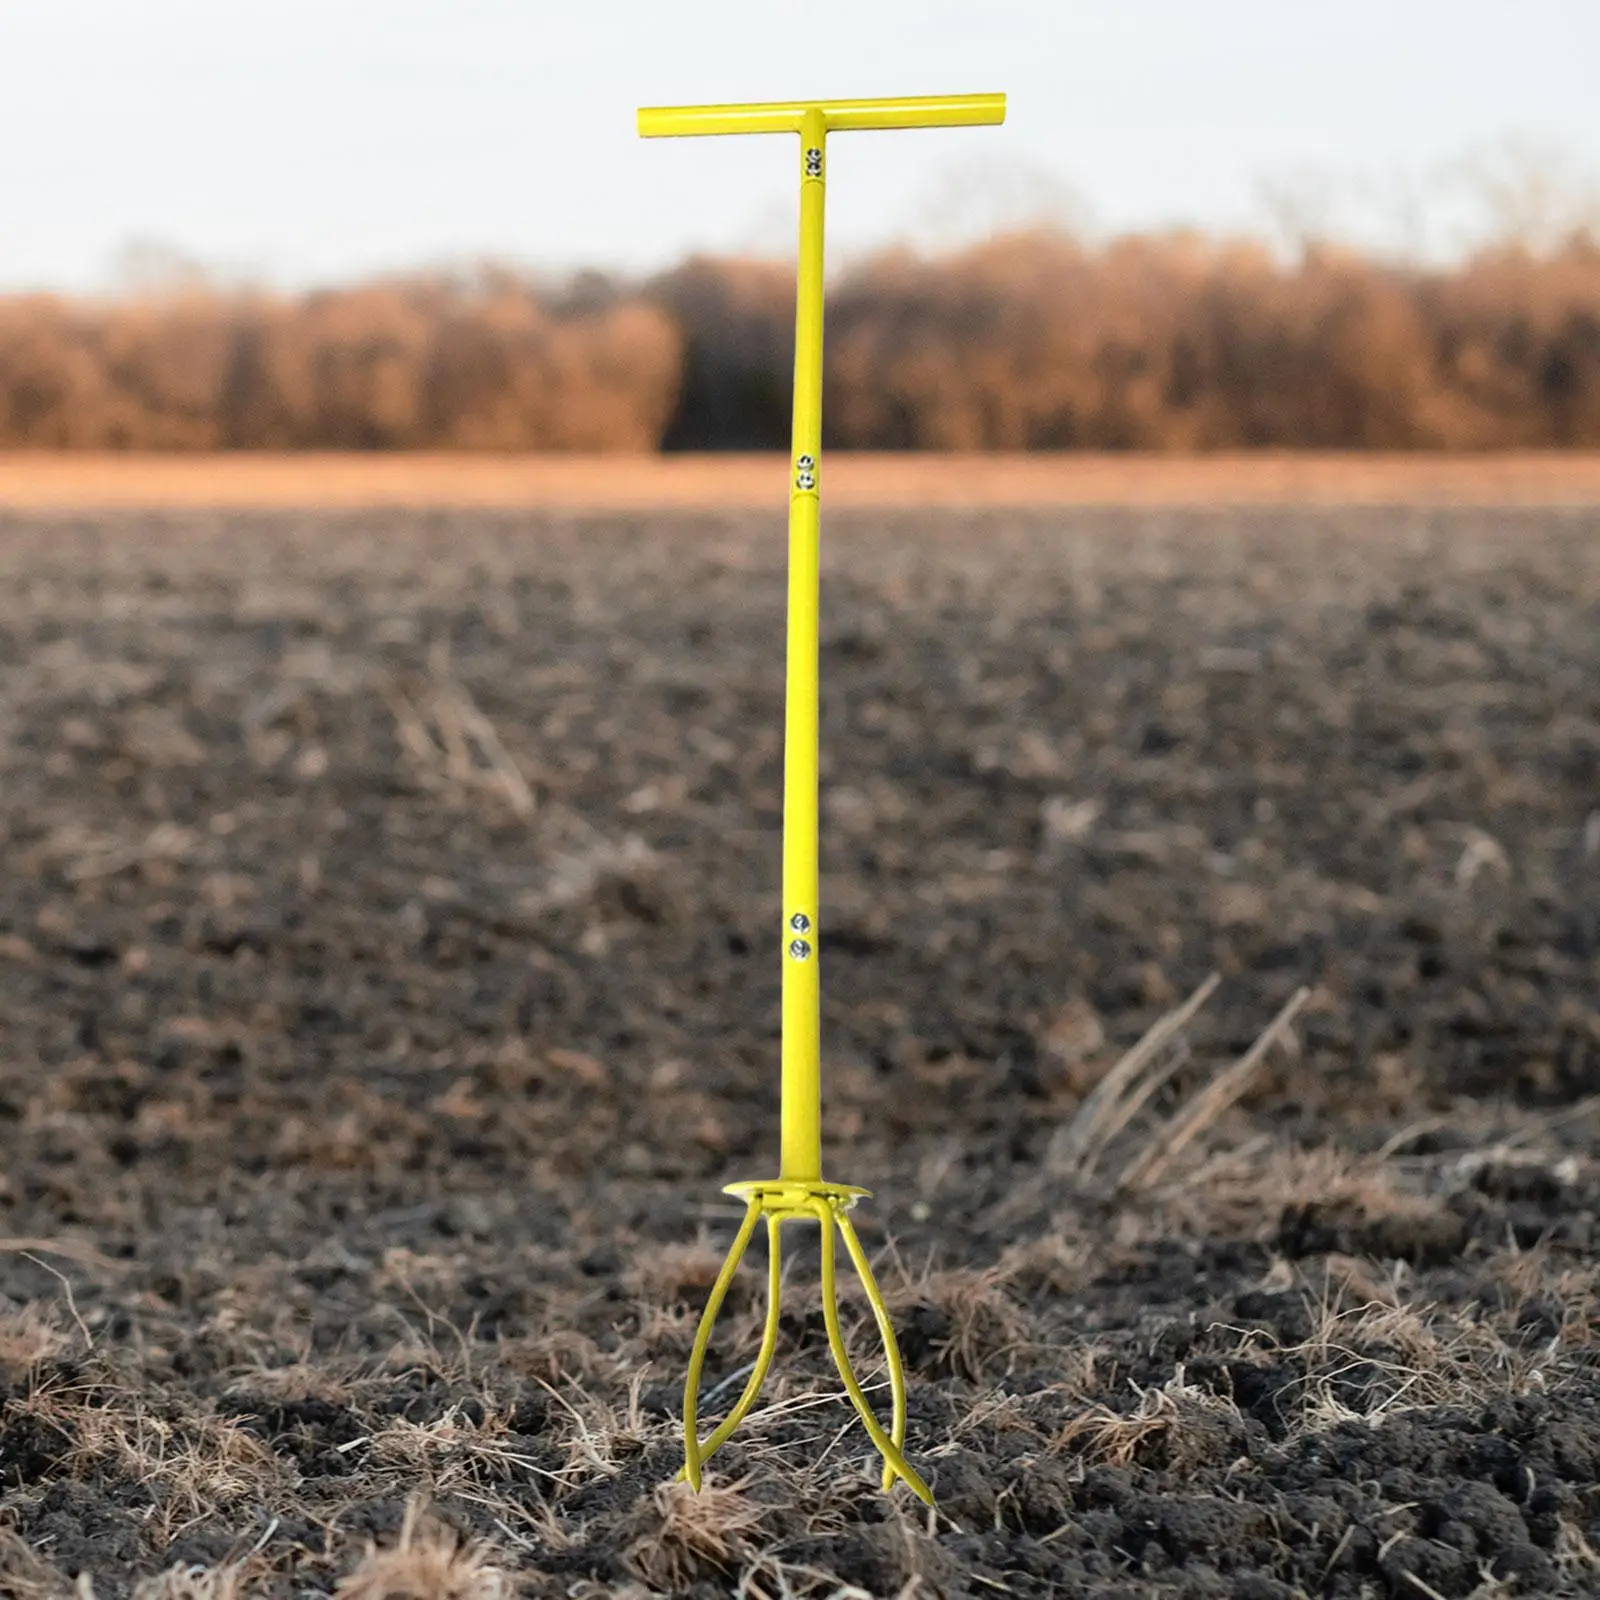 Manual Hand Tiller No Bending Strong Detachable Rugged with A Removable Big Claw Agriculture Garden Soil Tiller T Shaped Handle